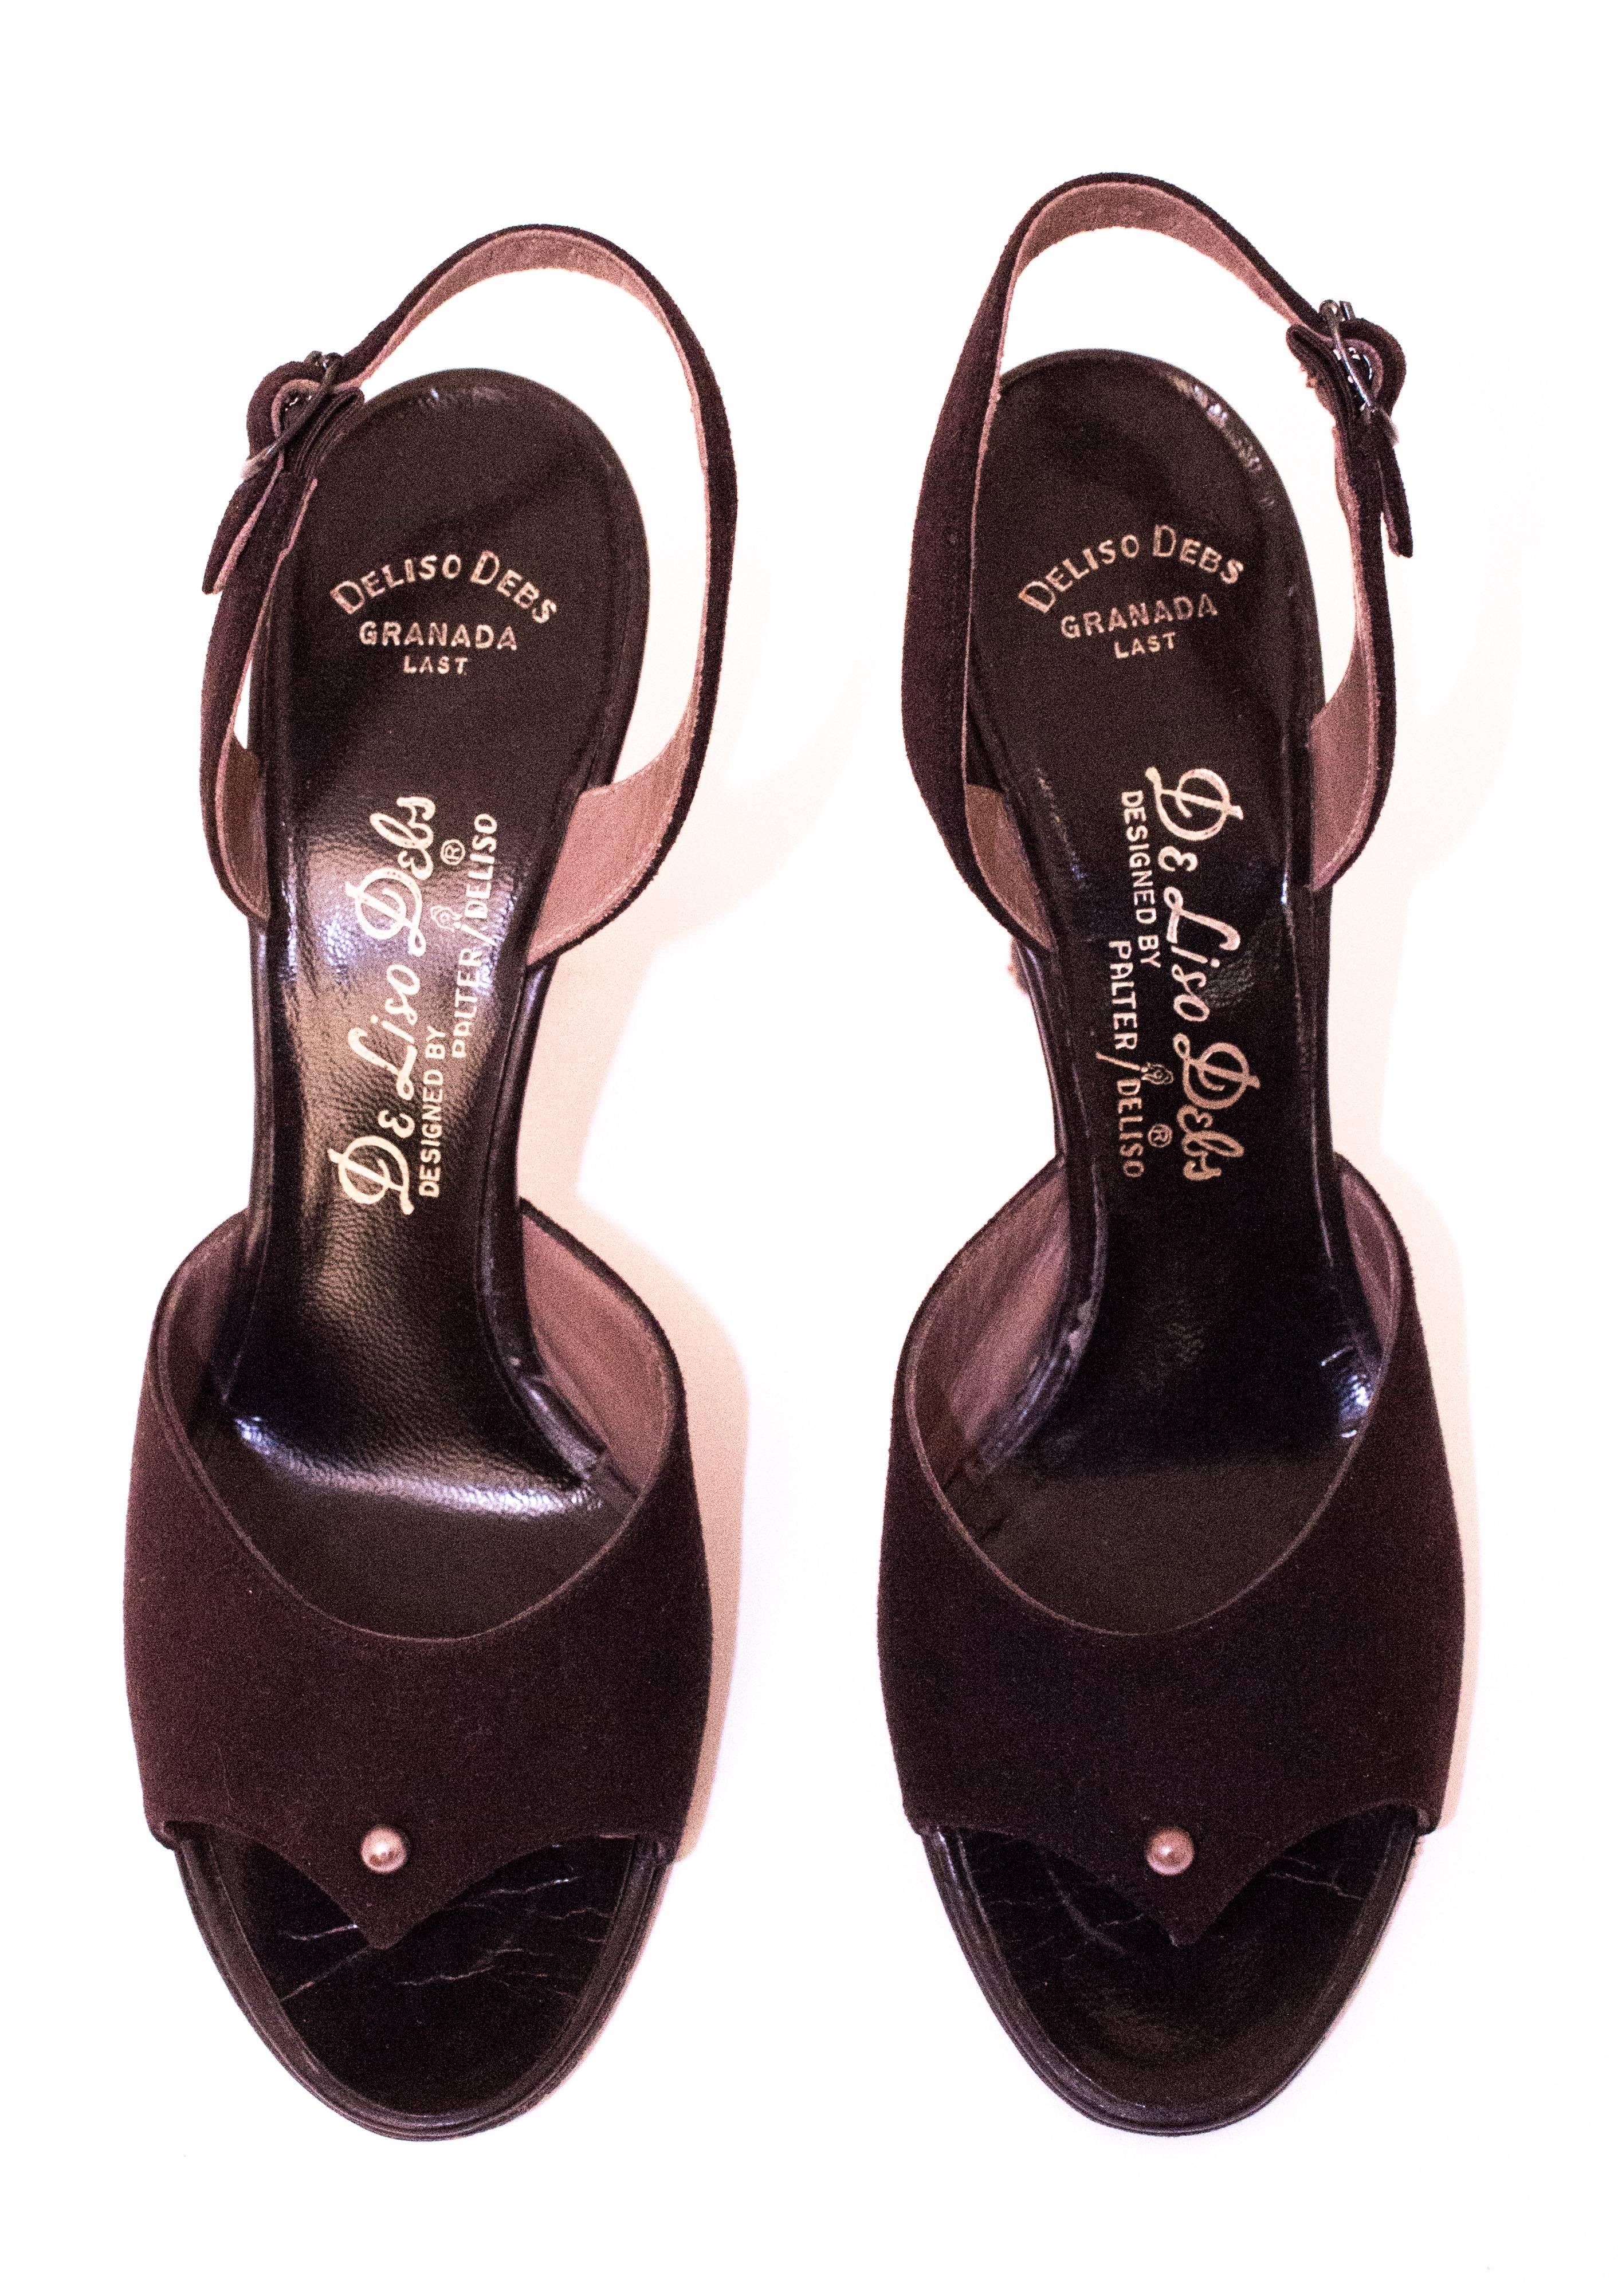 50s Brown Suede Peep-toe Slingback Heels. Small pearl adorns each toe top. Leather soles. 

Measurements:
Insole: 9 1/2